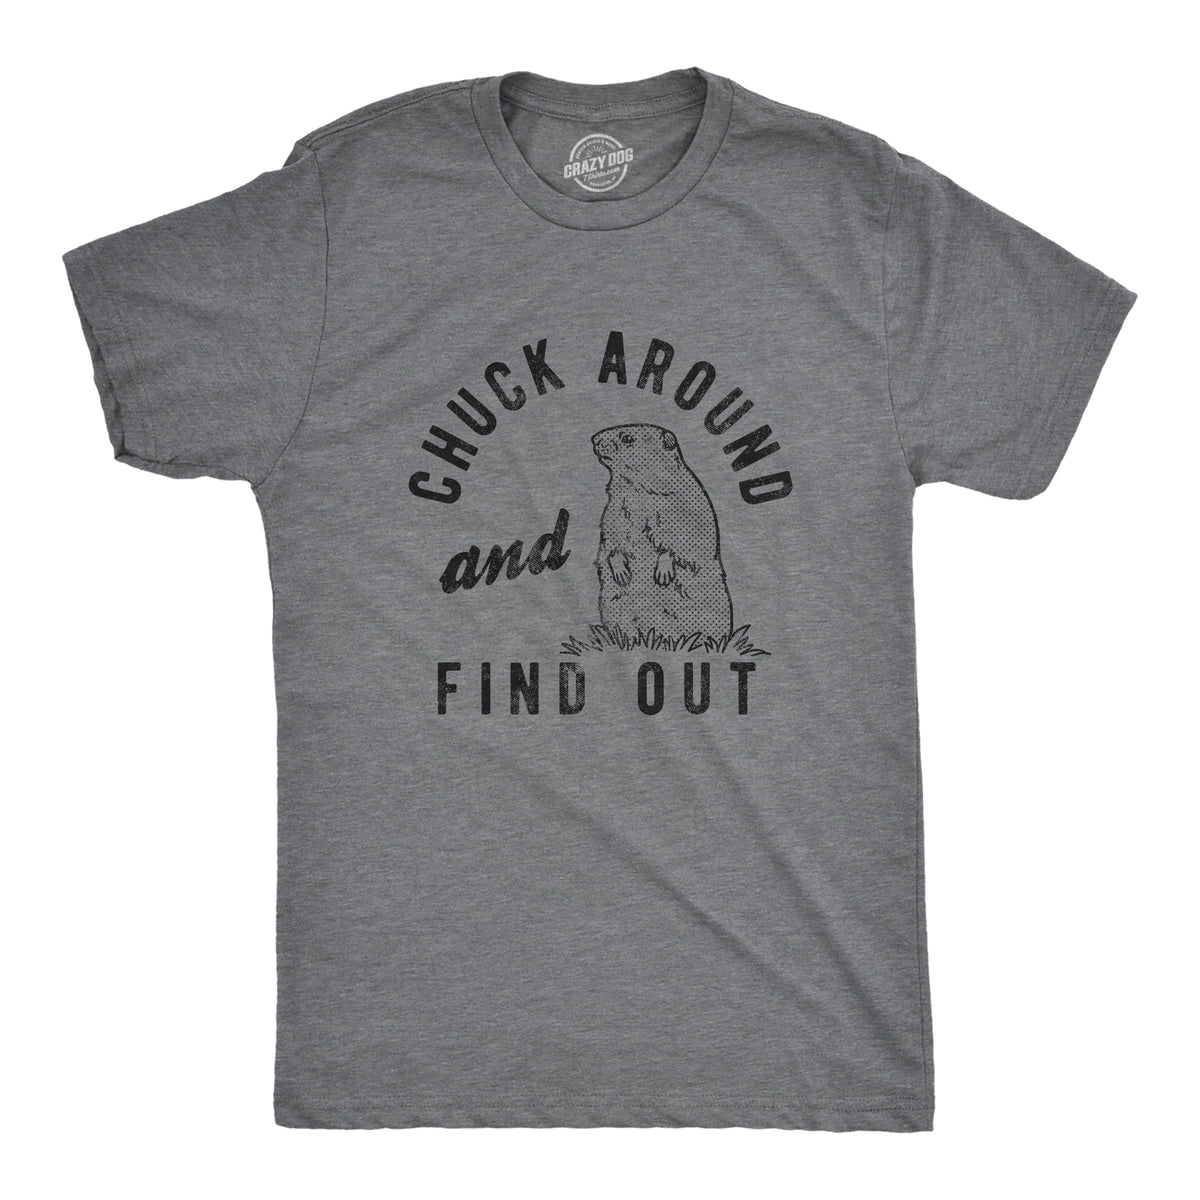 Funny Dark Heather Grey Chuck Around And Find Out Mens T Shirt Nerdy animal Tee